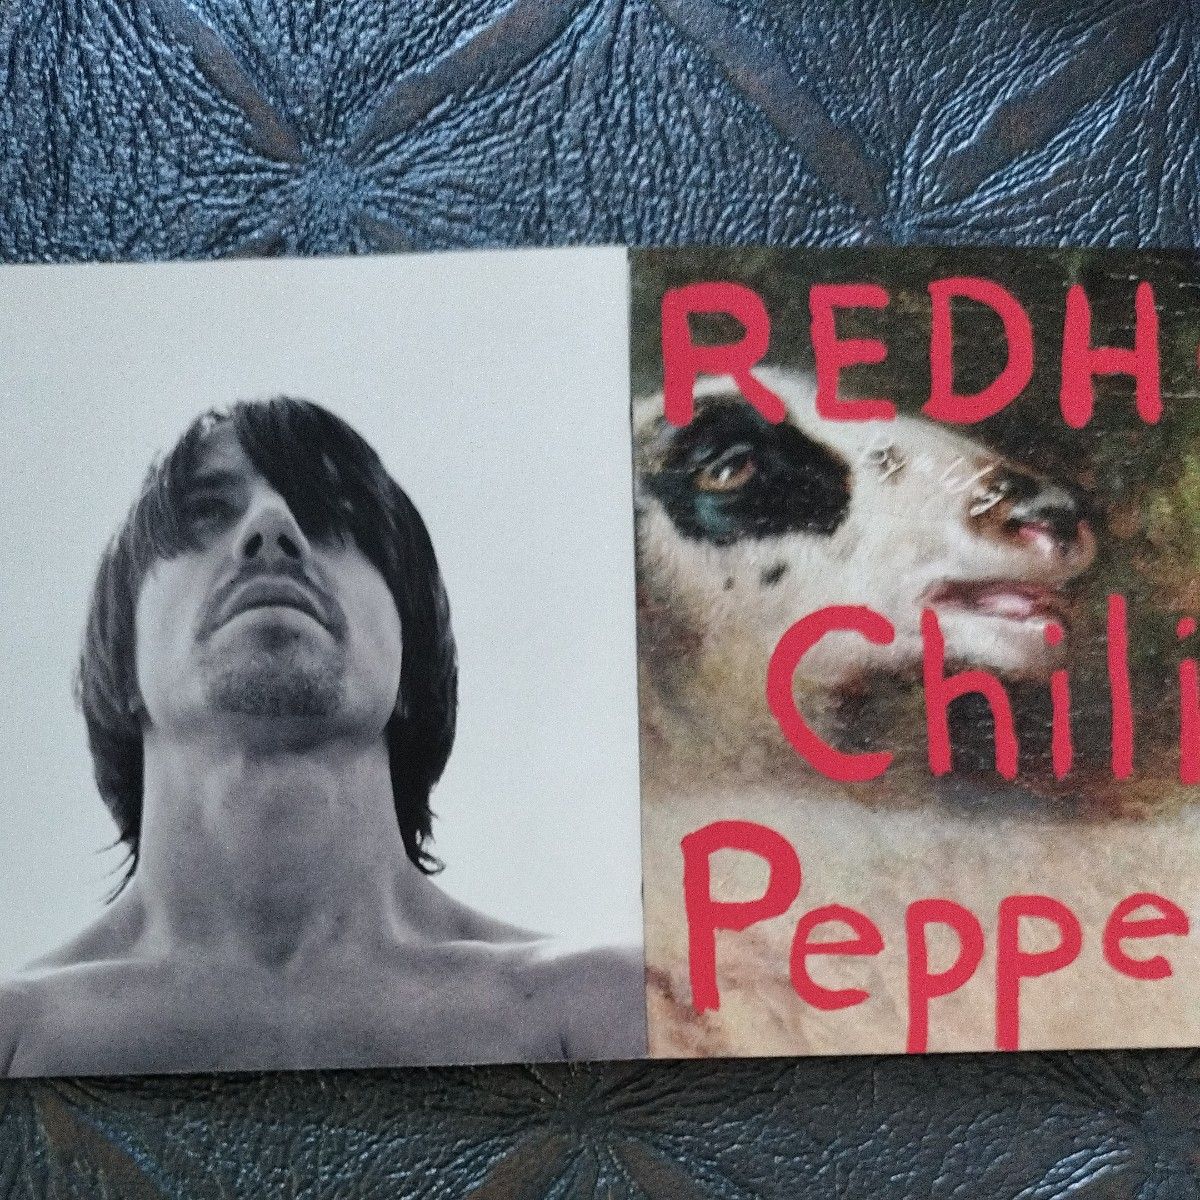 RED HOT Chili PepperS / By the Way 【輸入盤CDアルバム】＋【国内盤DVDシングル】